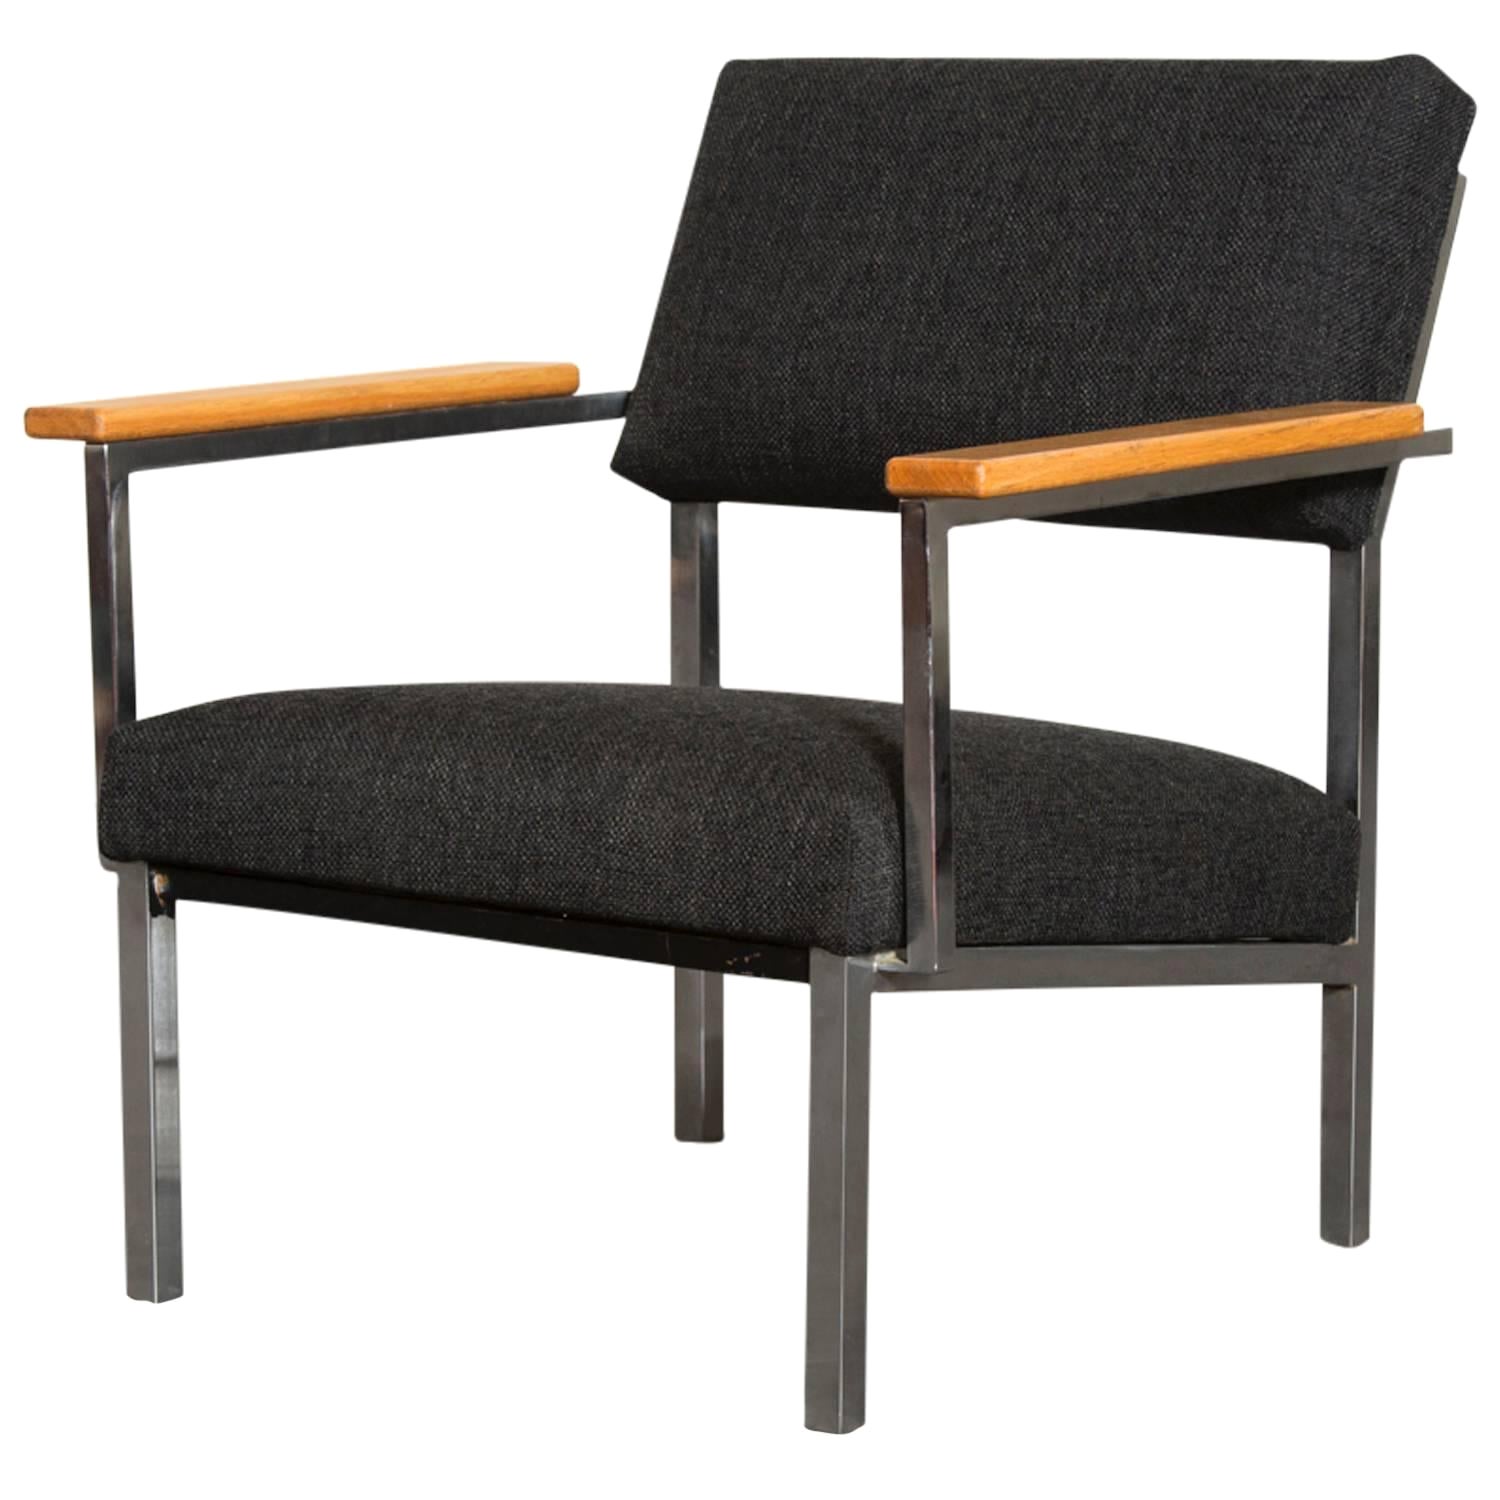  Spectrum Lounge Chair in Charcoal and Chrome For Sale